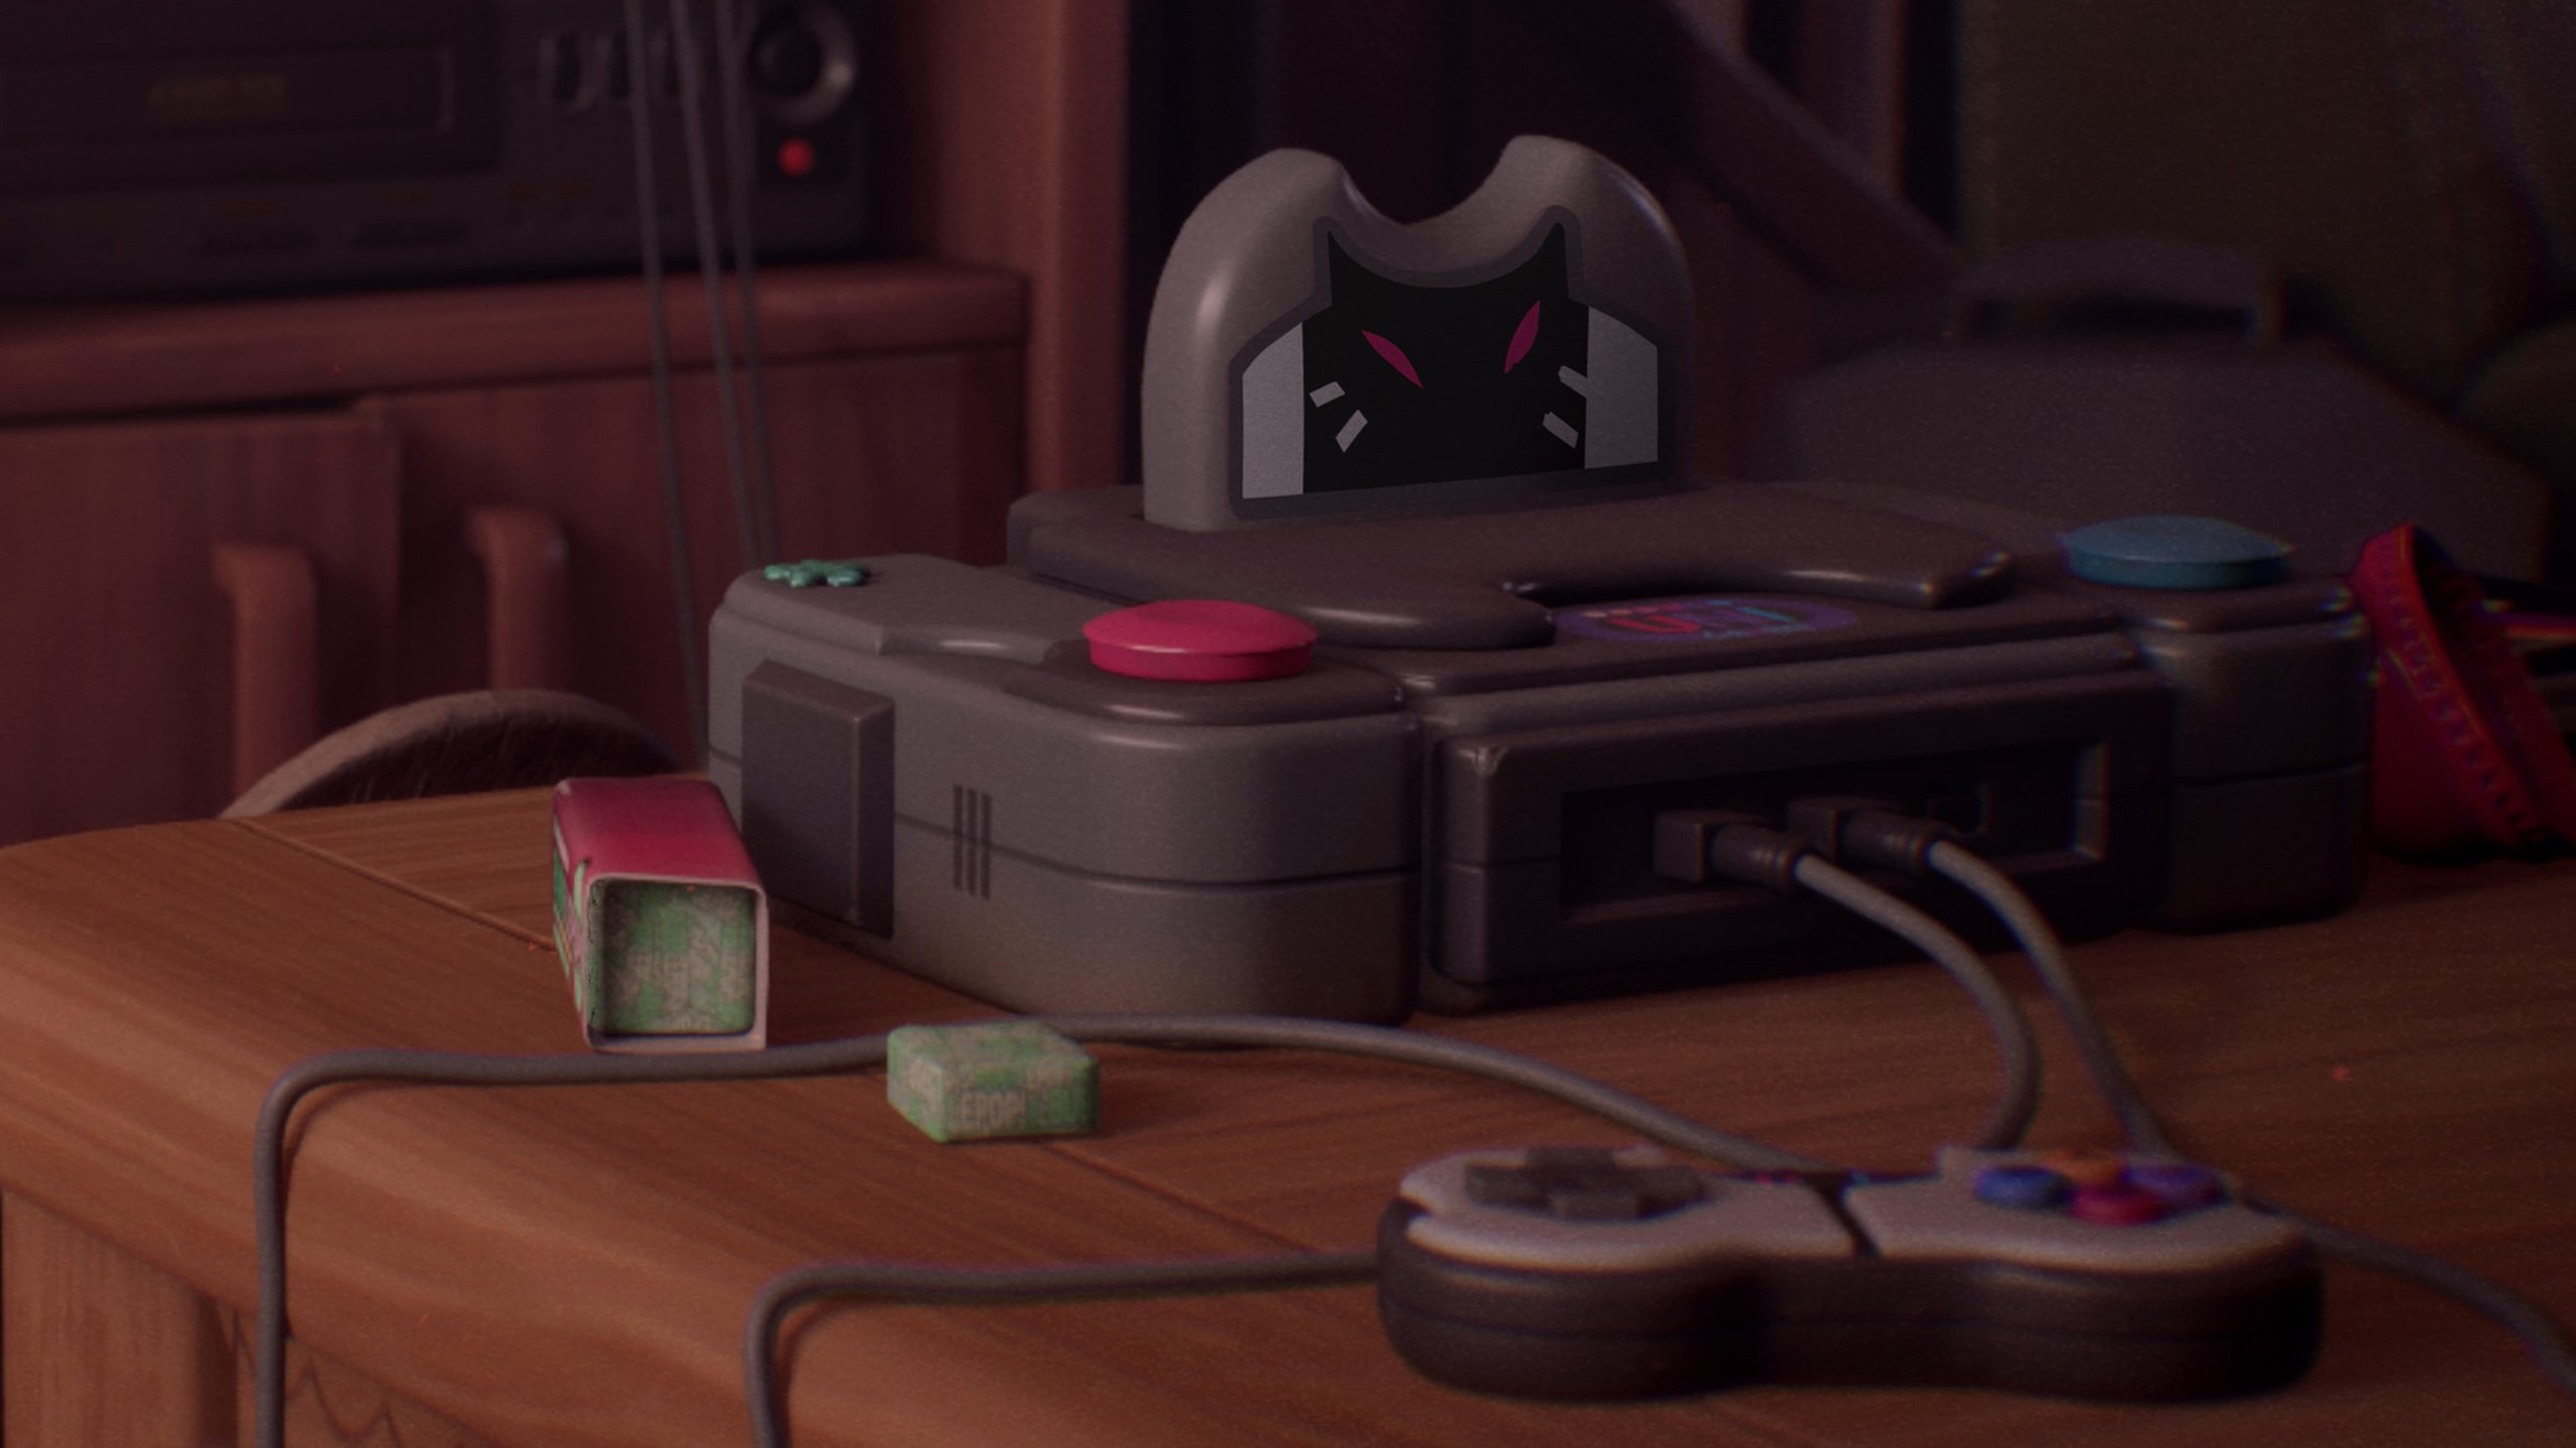  Life is Strange studio packs gaming nostalgia into a 'little glimpse' of its next game 